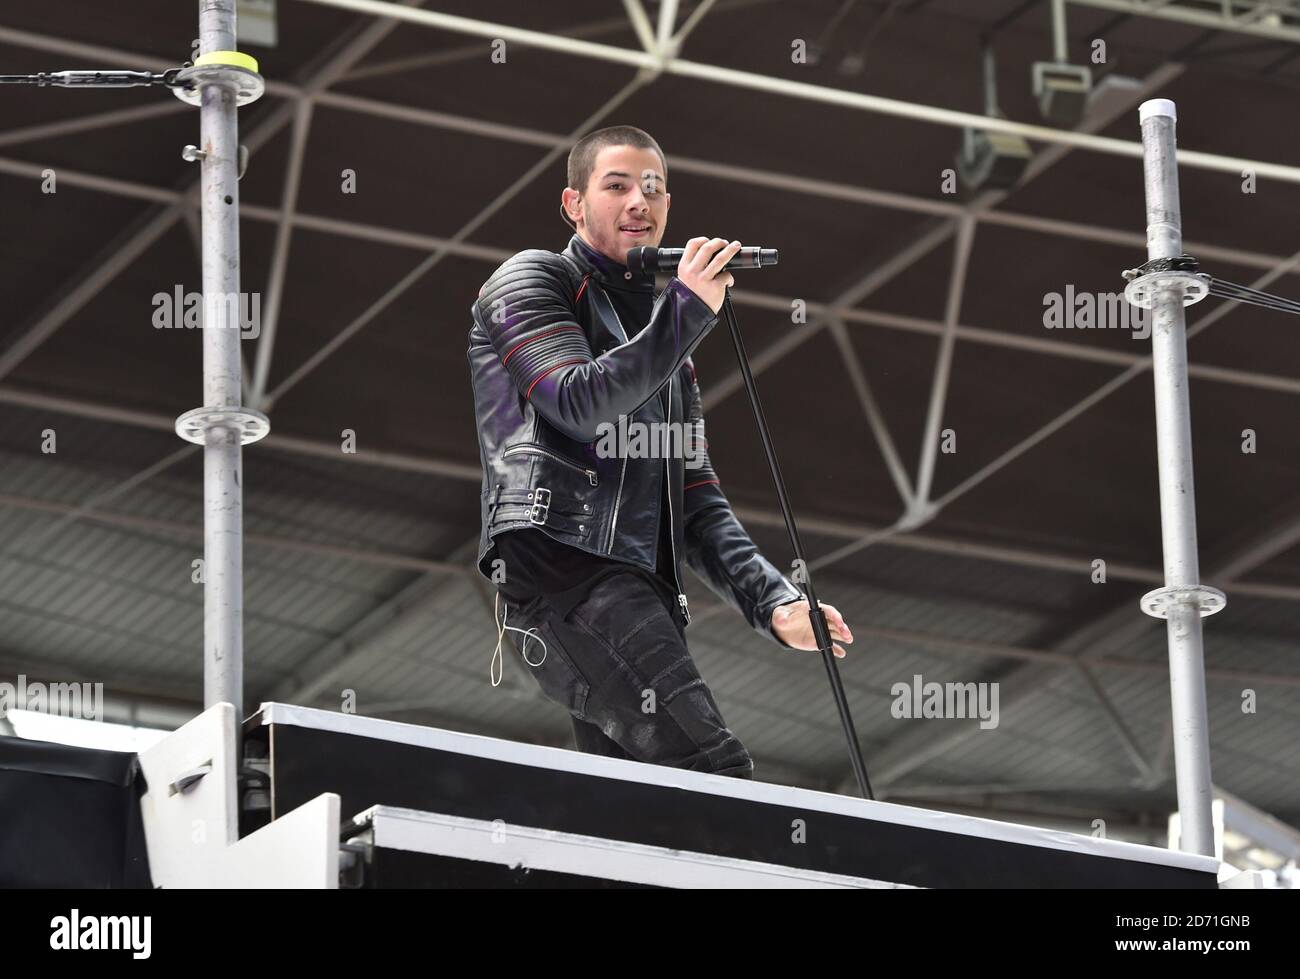 EXCLUSIVE Nick Jonas performs on stage during Capital FM's Summertime Ball at Wembley Stadium, London. Stock Photo